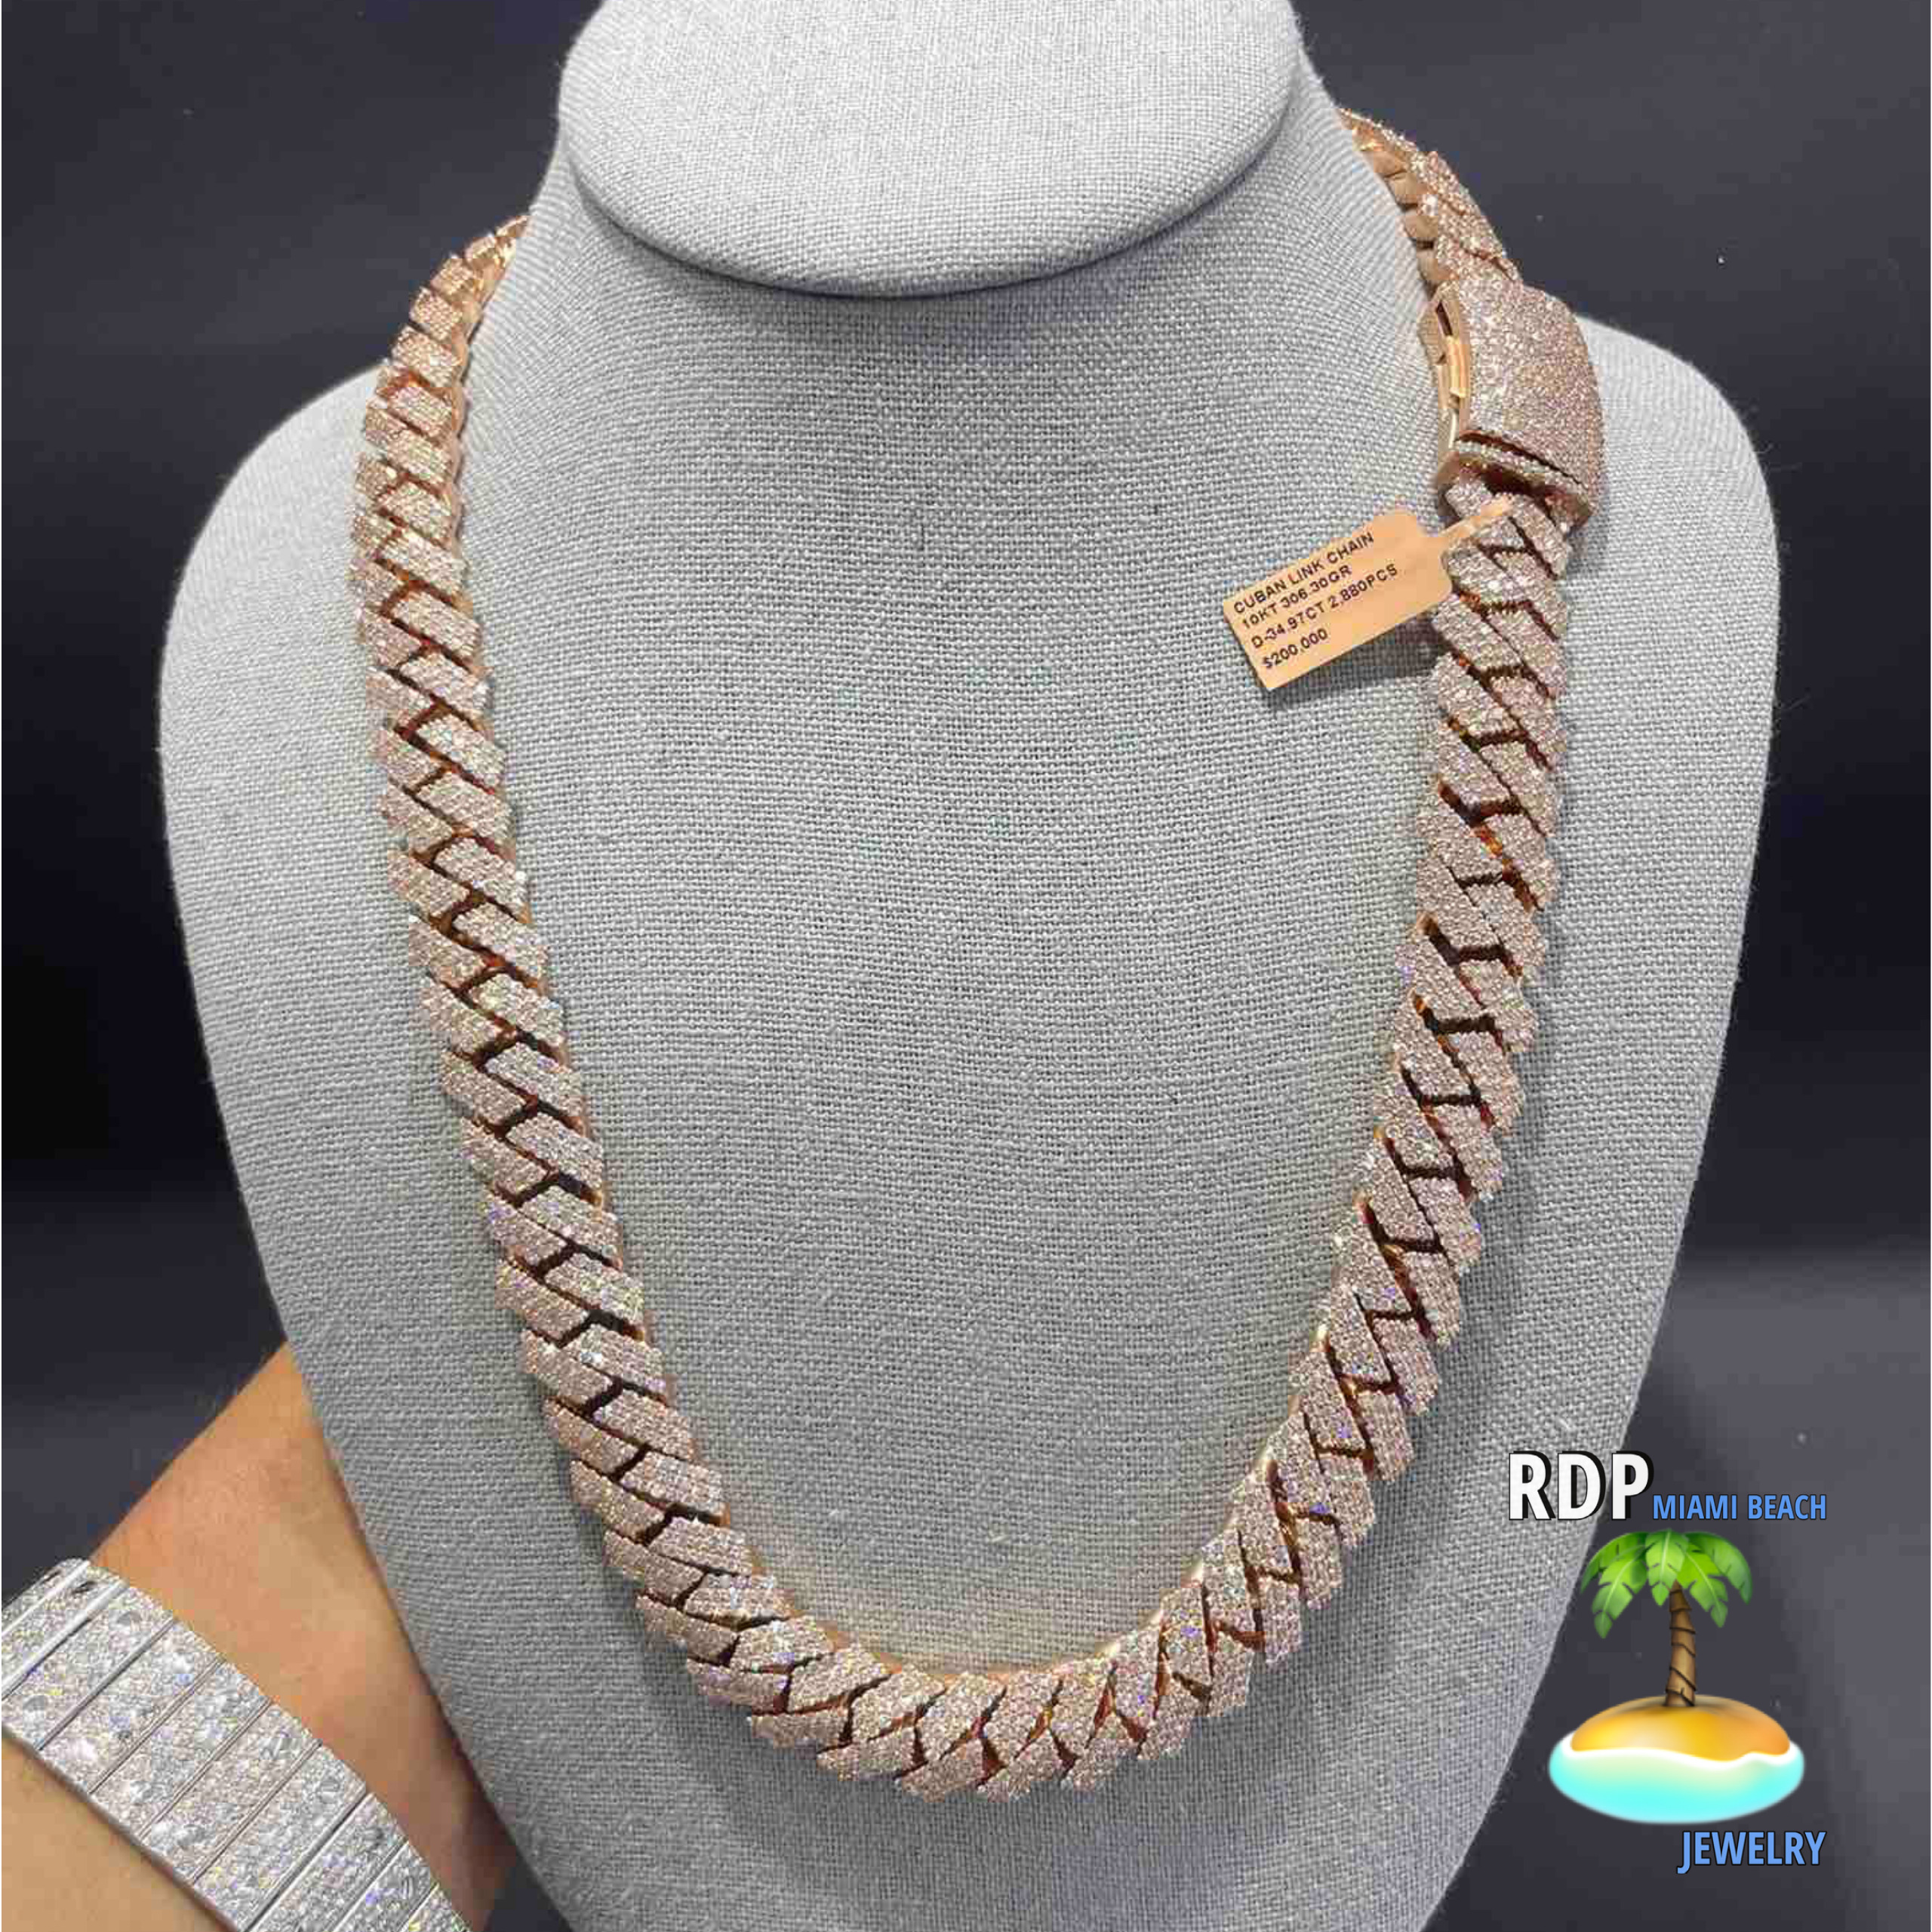 gold chains for women